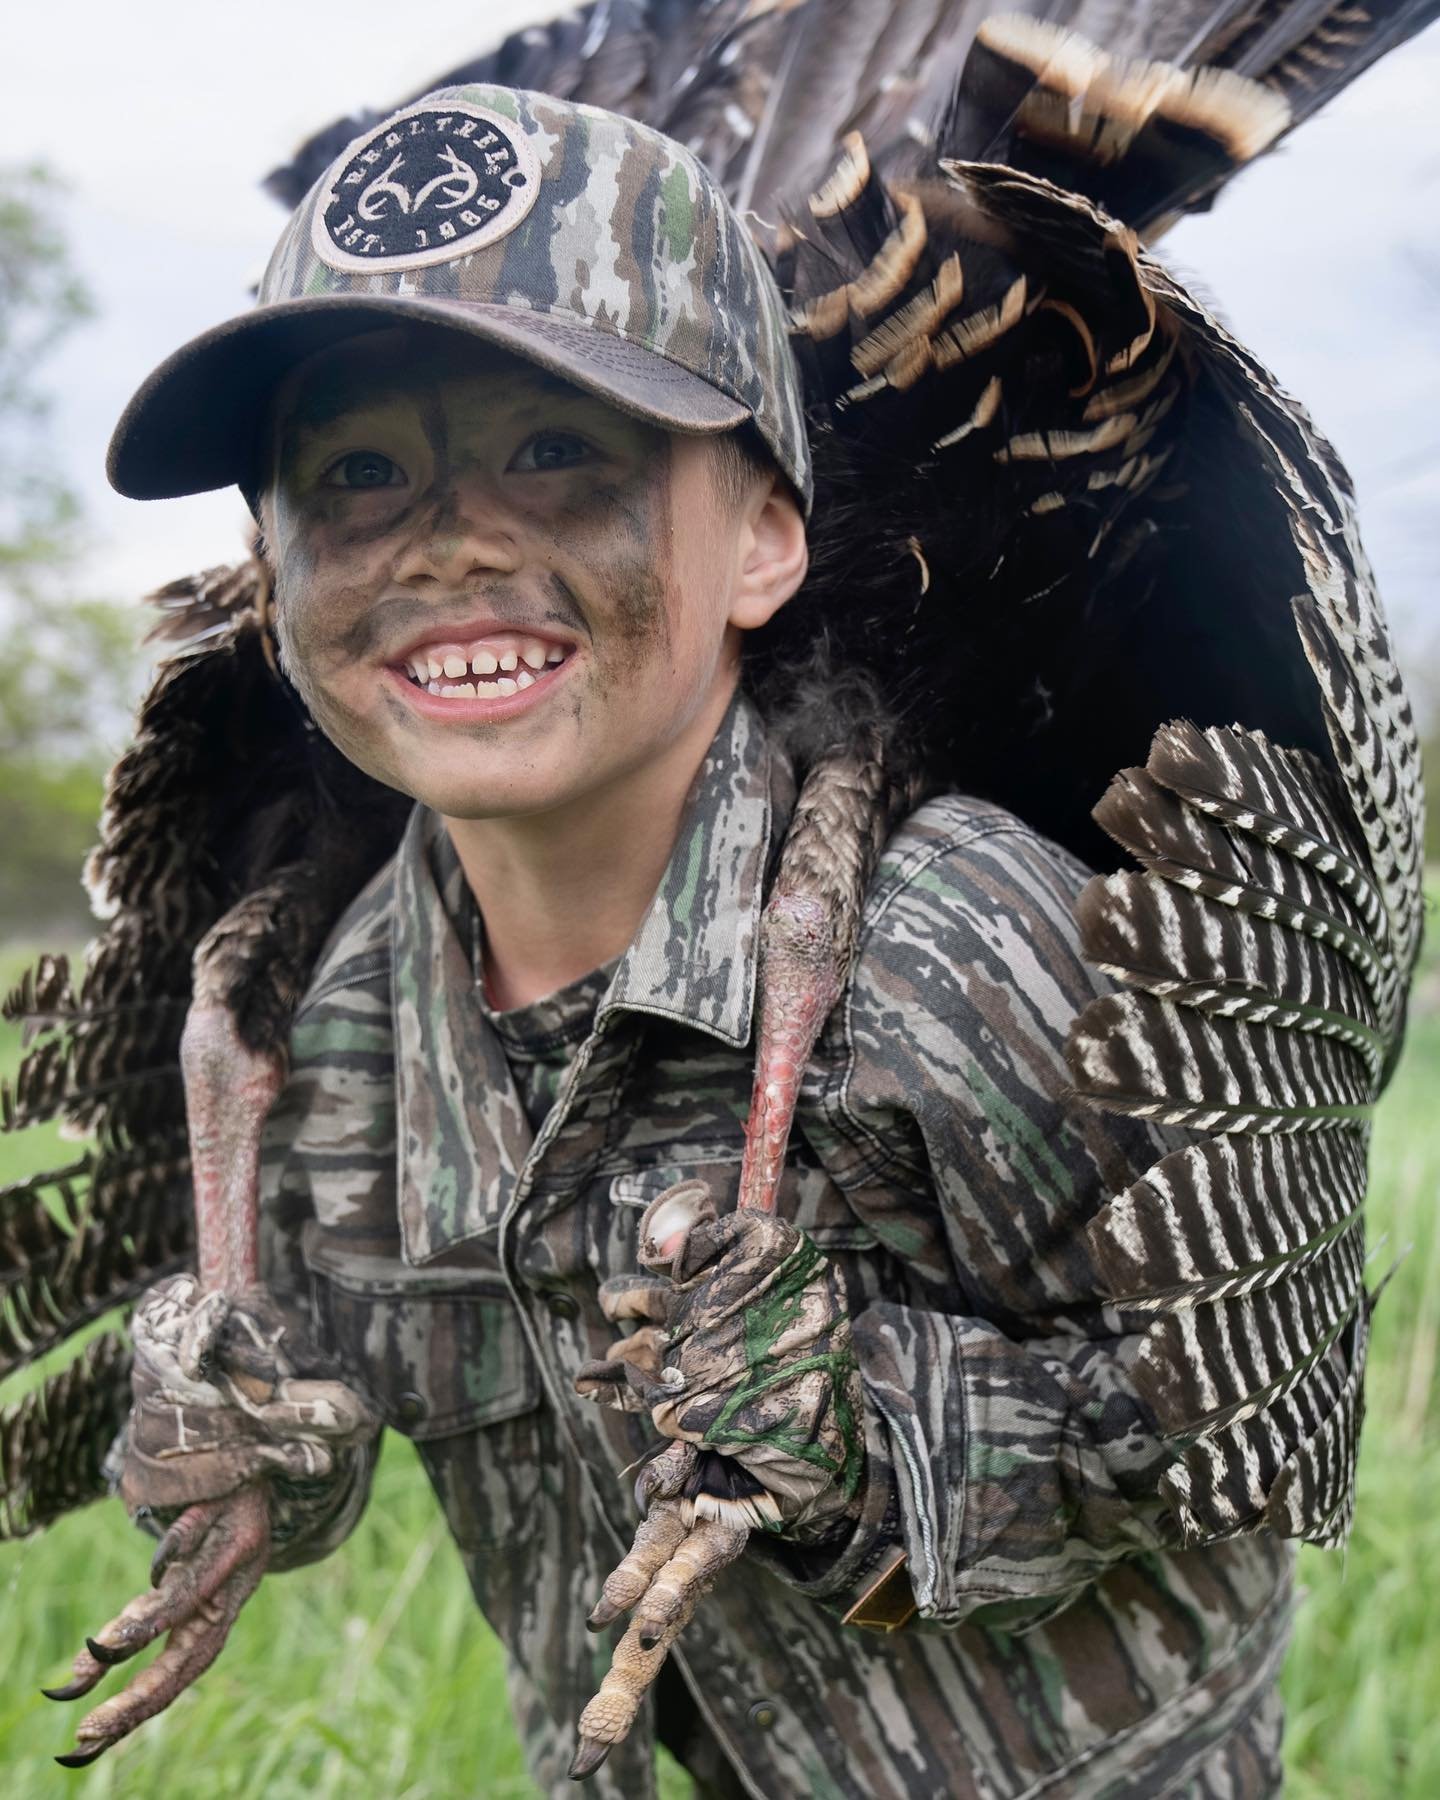 Jax was a big help on my turkey hunt even though he was putting on face-paint as the turkey was coming into range. 😳

We all had an awesome time and Jax even packed it out for me. He did inform me his turkey was at least 10x bigger than mine&hellip;